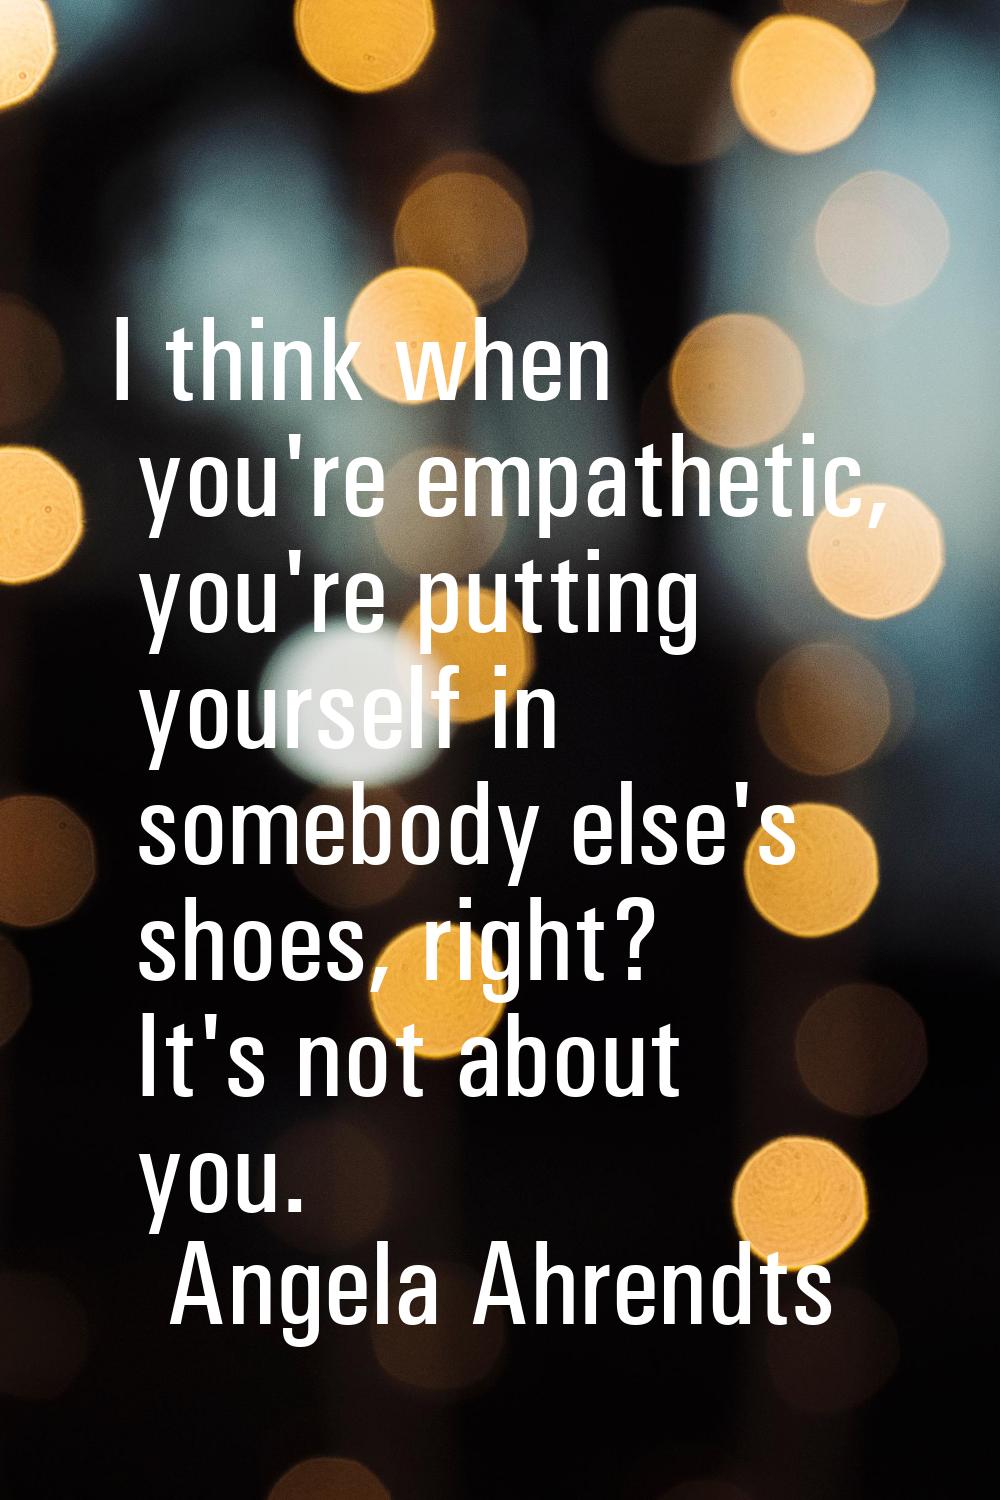 I think when you're empathetic, you're putting yourself in somebody else's shoes, right? It's not a